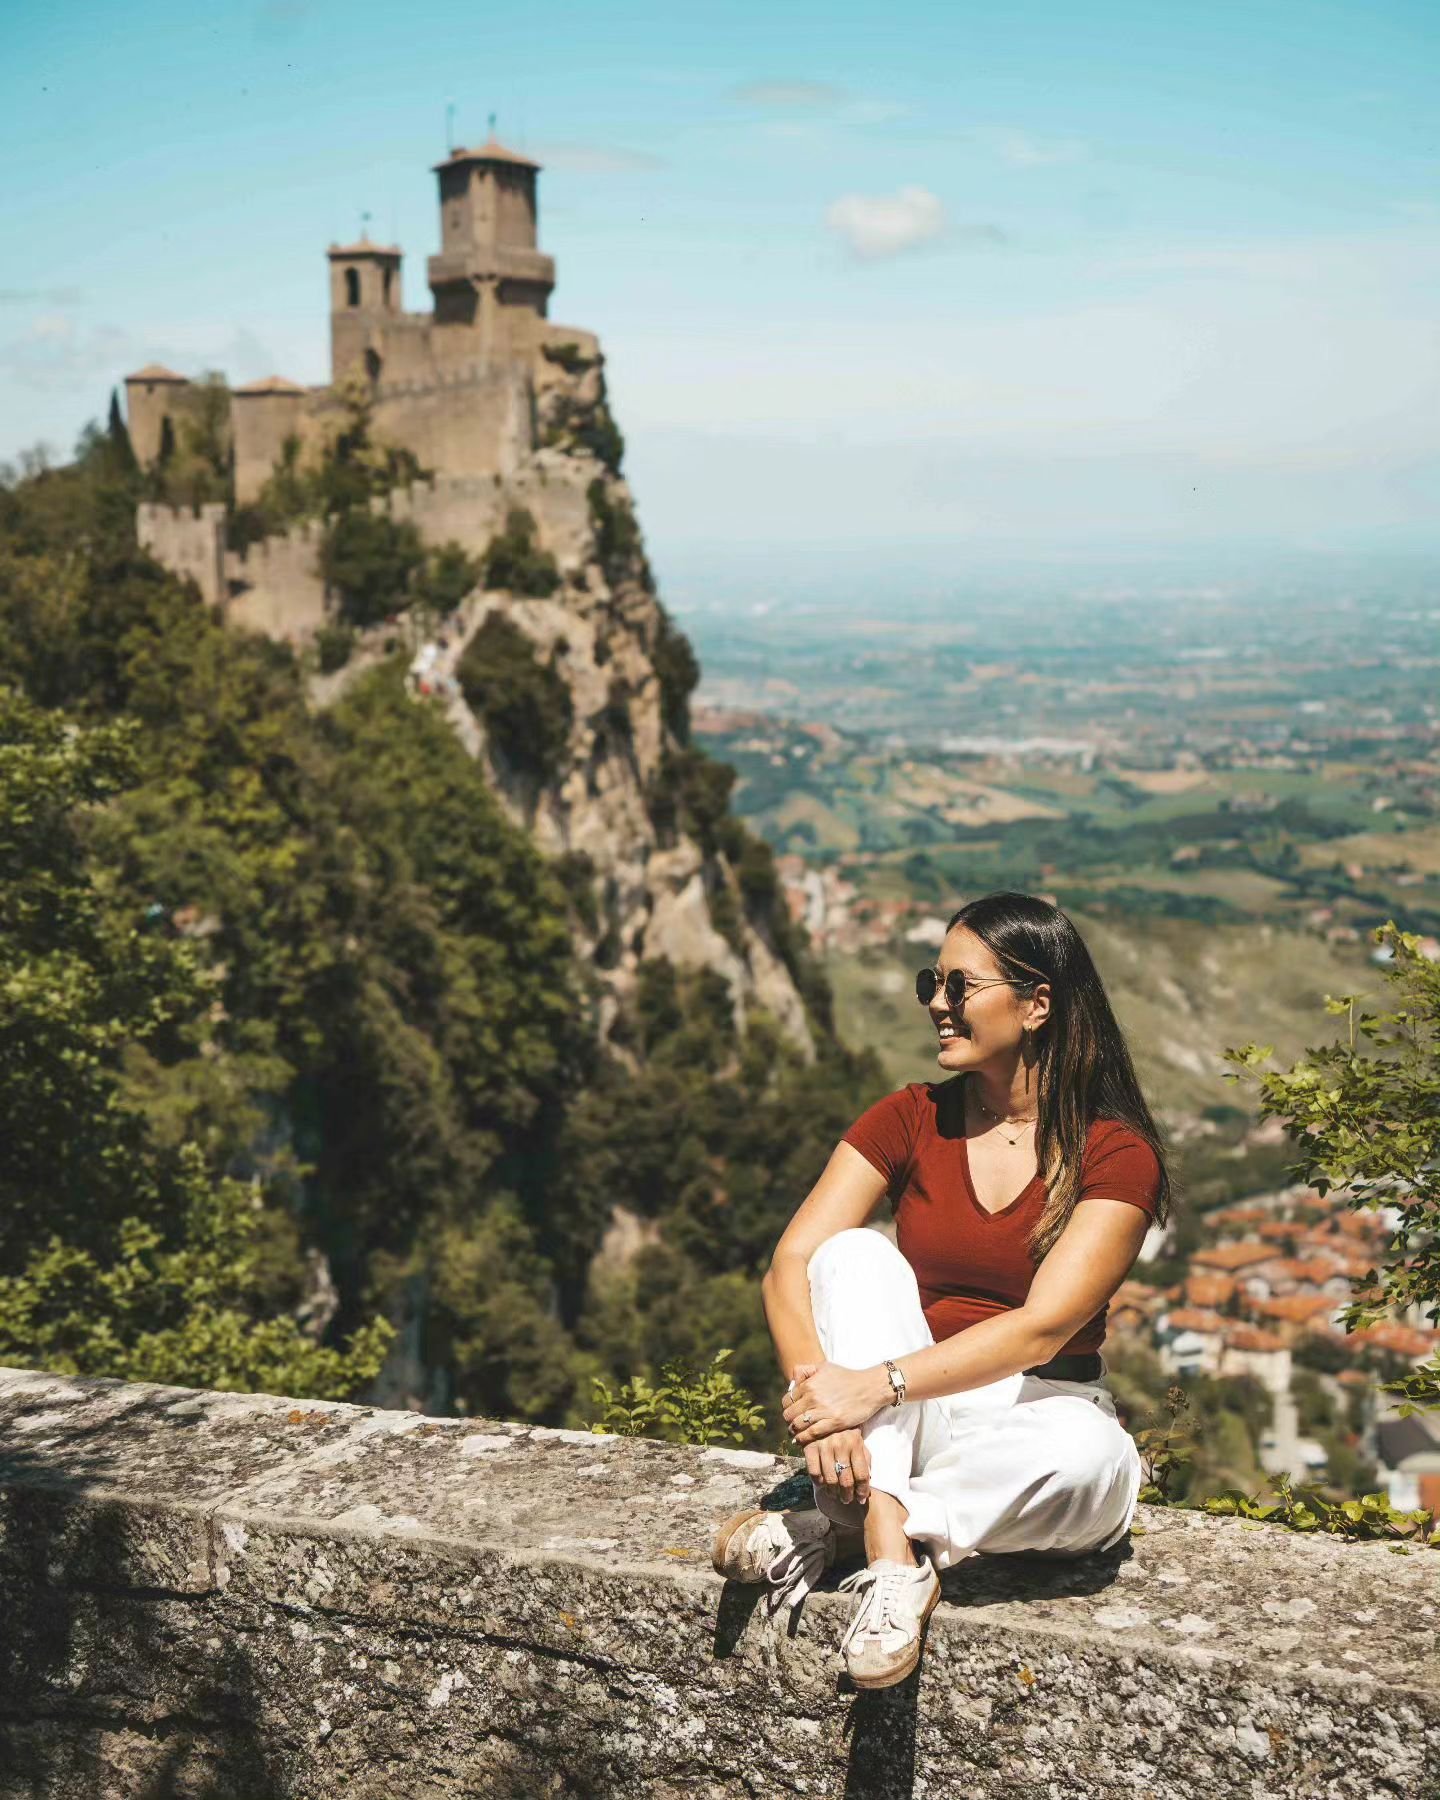 SAN MARINO 🇸🇲 This microstate was actually my 81st country but I'm back! My first visit was in October 2021, and being completely honest it was rather quick (it's the fifth smallest country in the world at 61 sq km / 23 square miles so you can see 